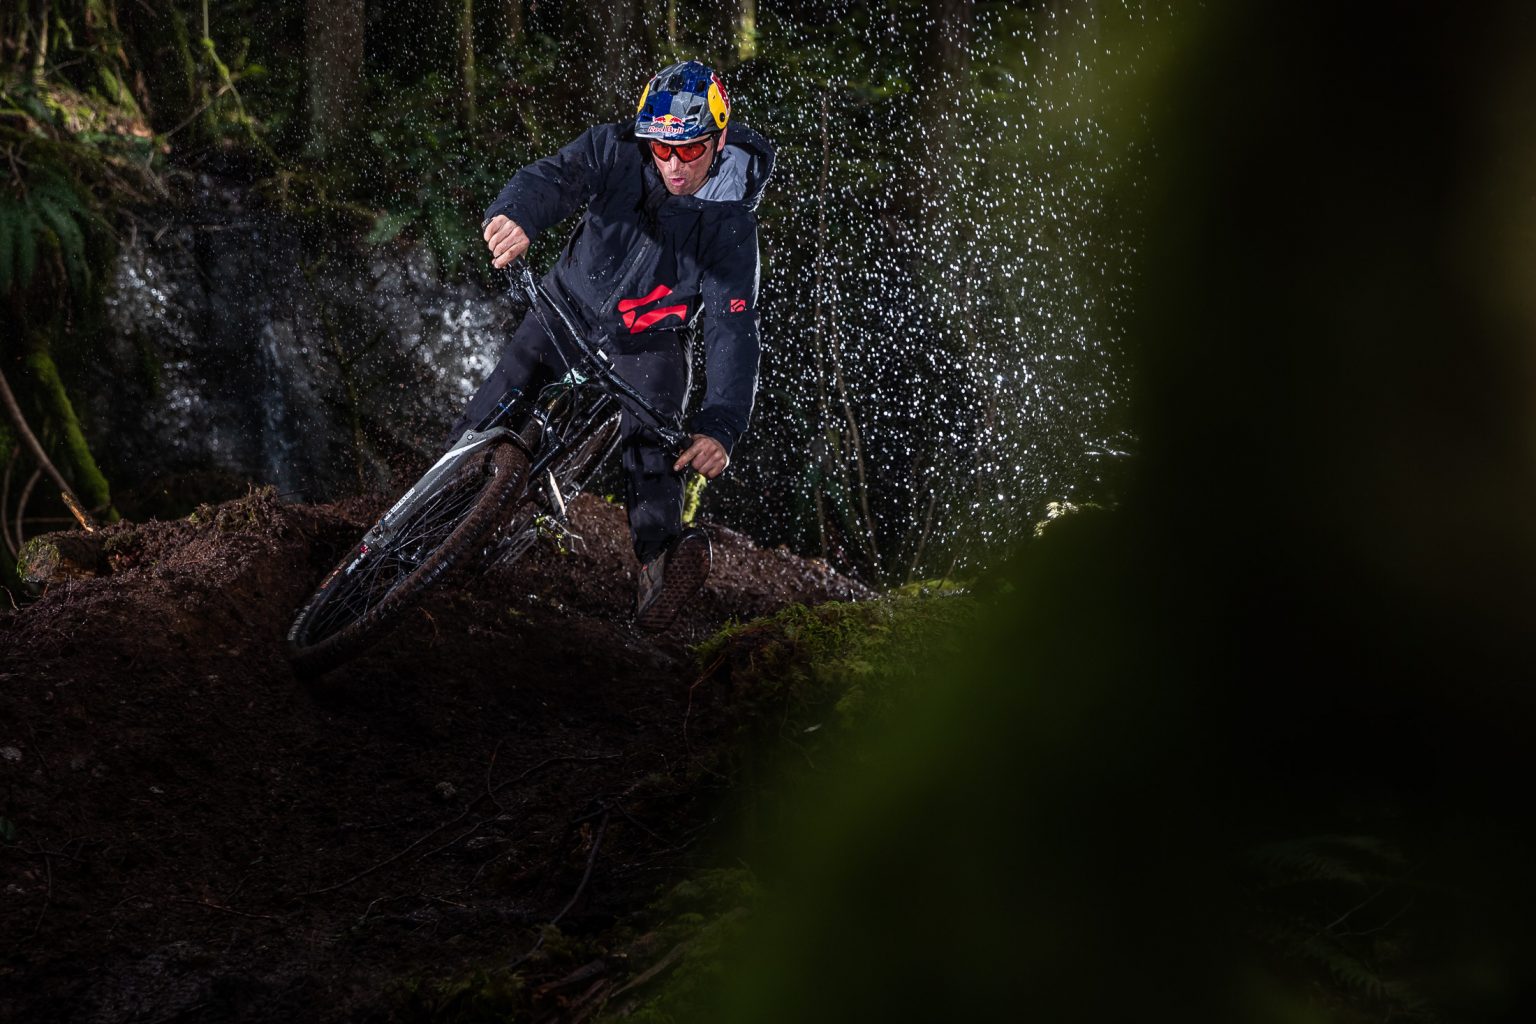 Press Release: Five Ten introduces the new Trailcross GTX - The ultimate wet weather riding shoe